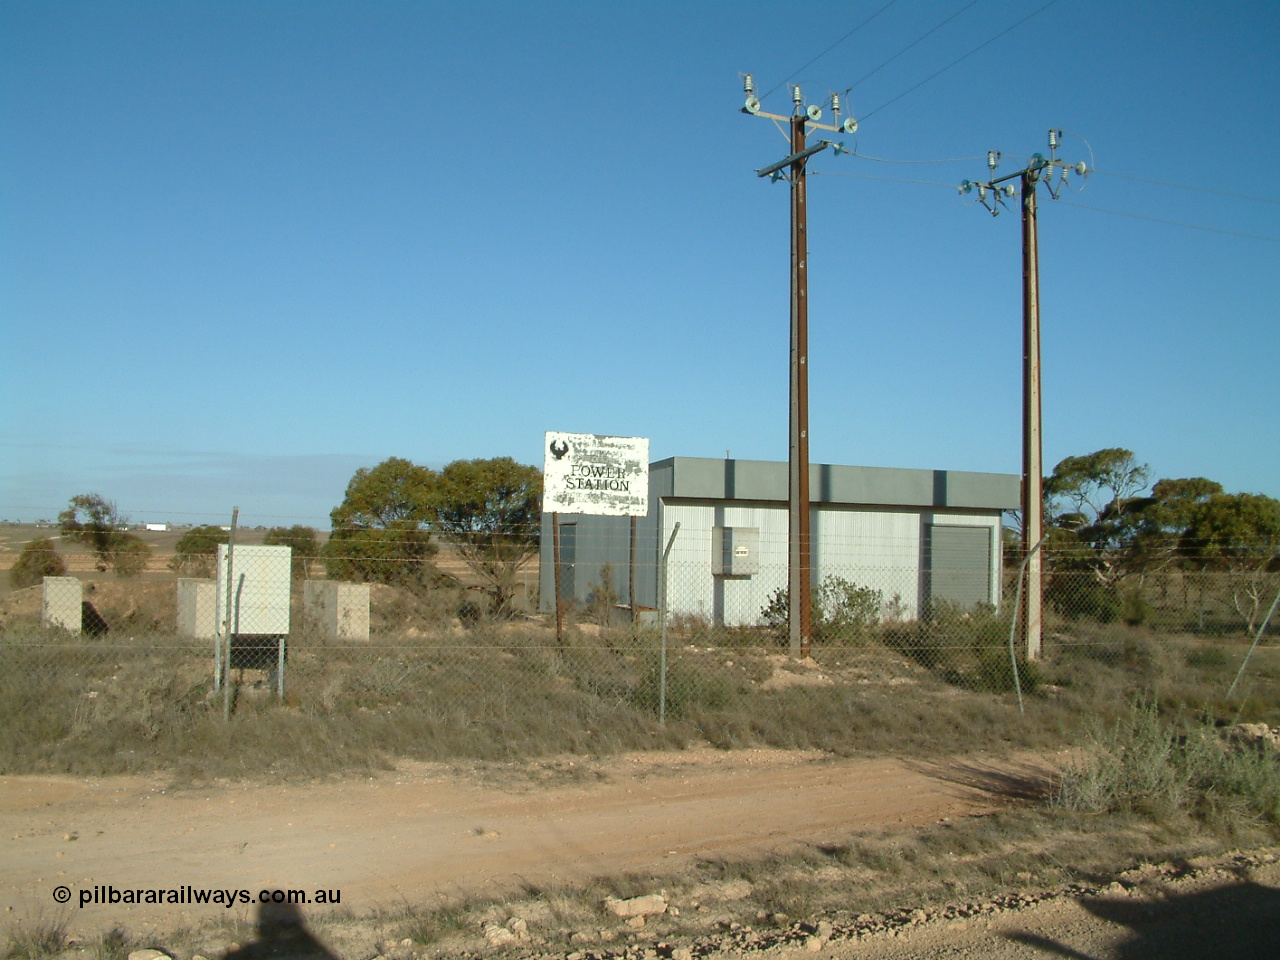 030414 165816
Penong, former power station, couple of Stobie poles out the front.
